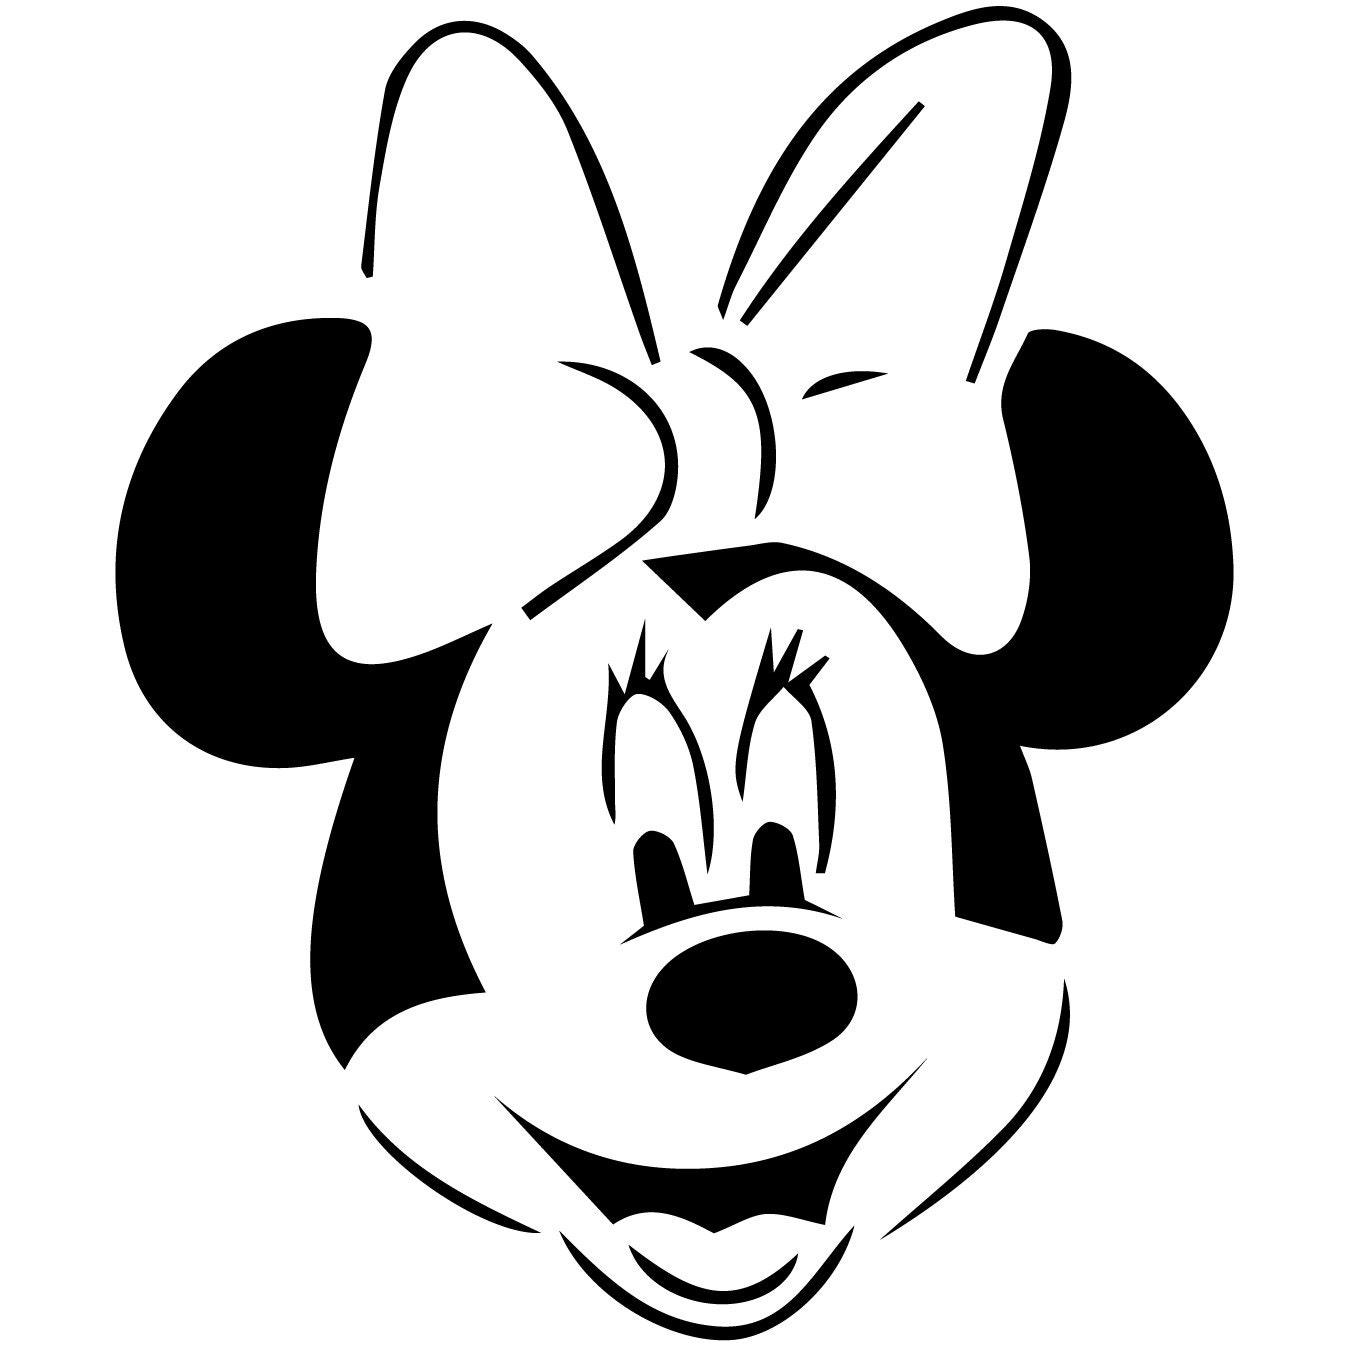 Download SVG Minnie mouse Minnie mouse eps Minnie mouse silhouette